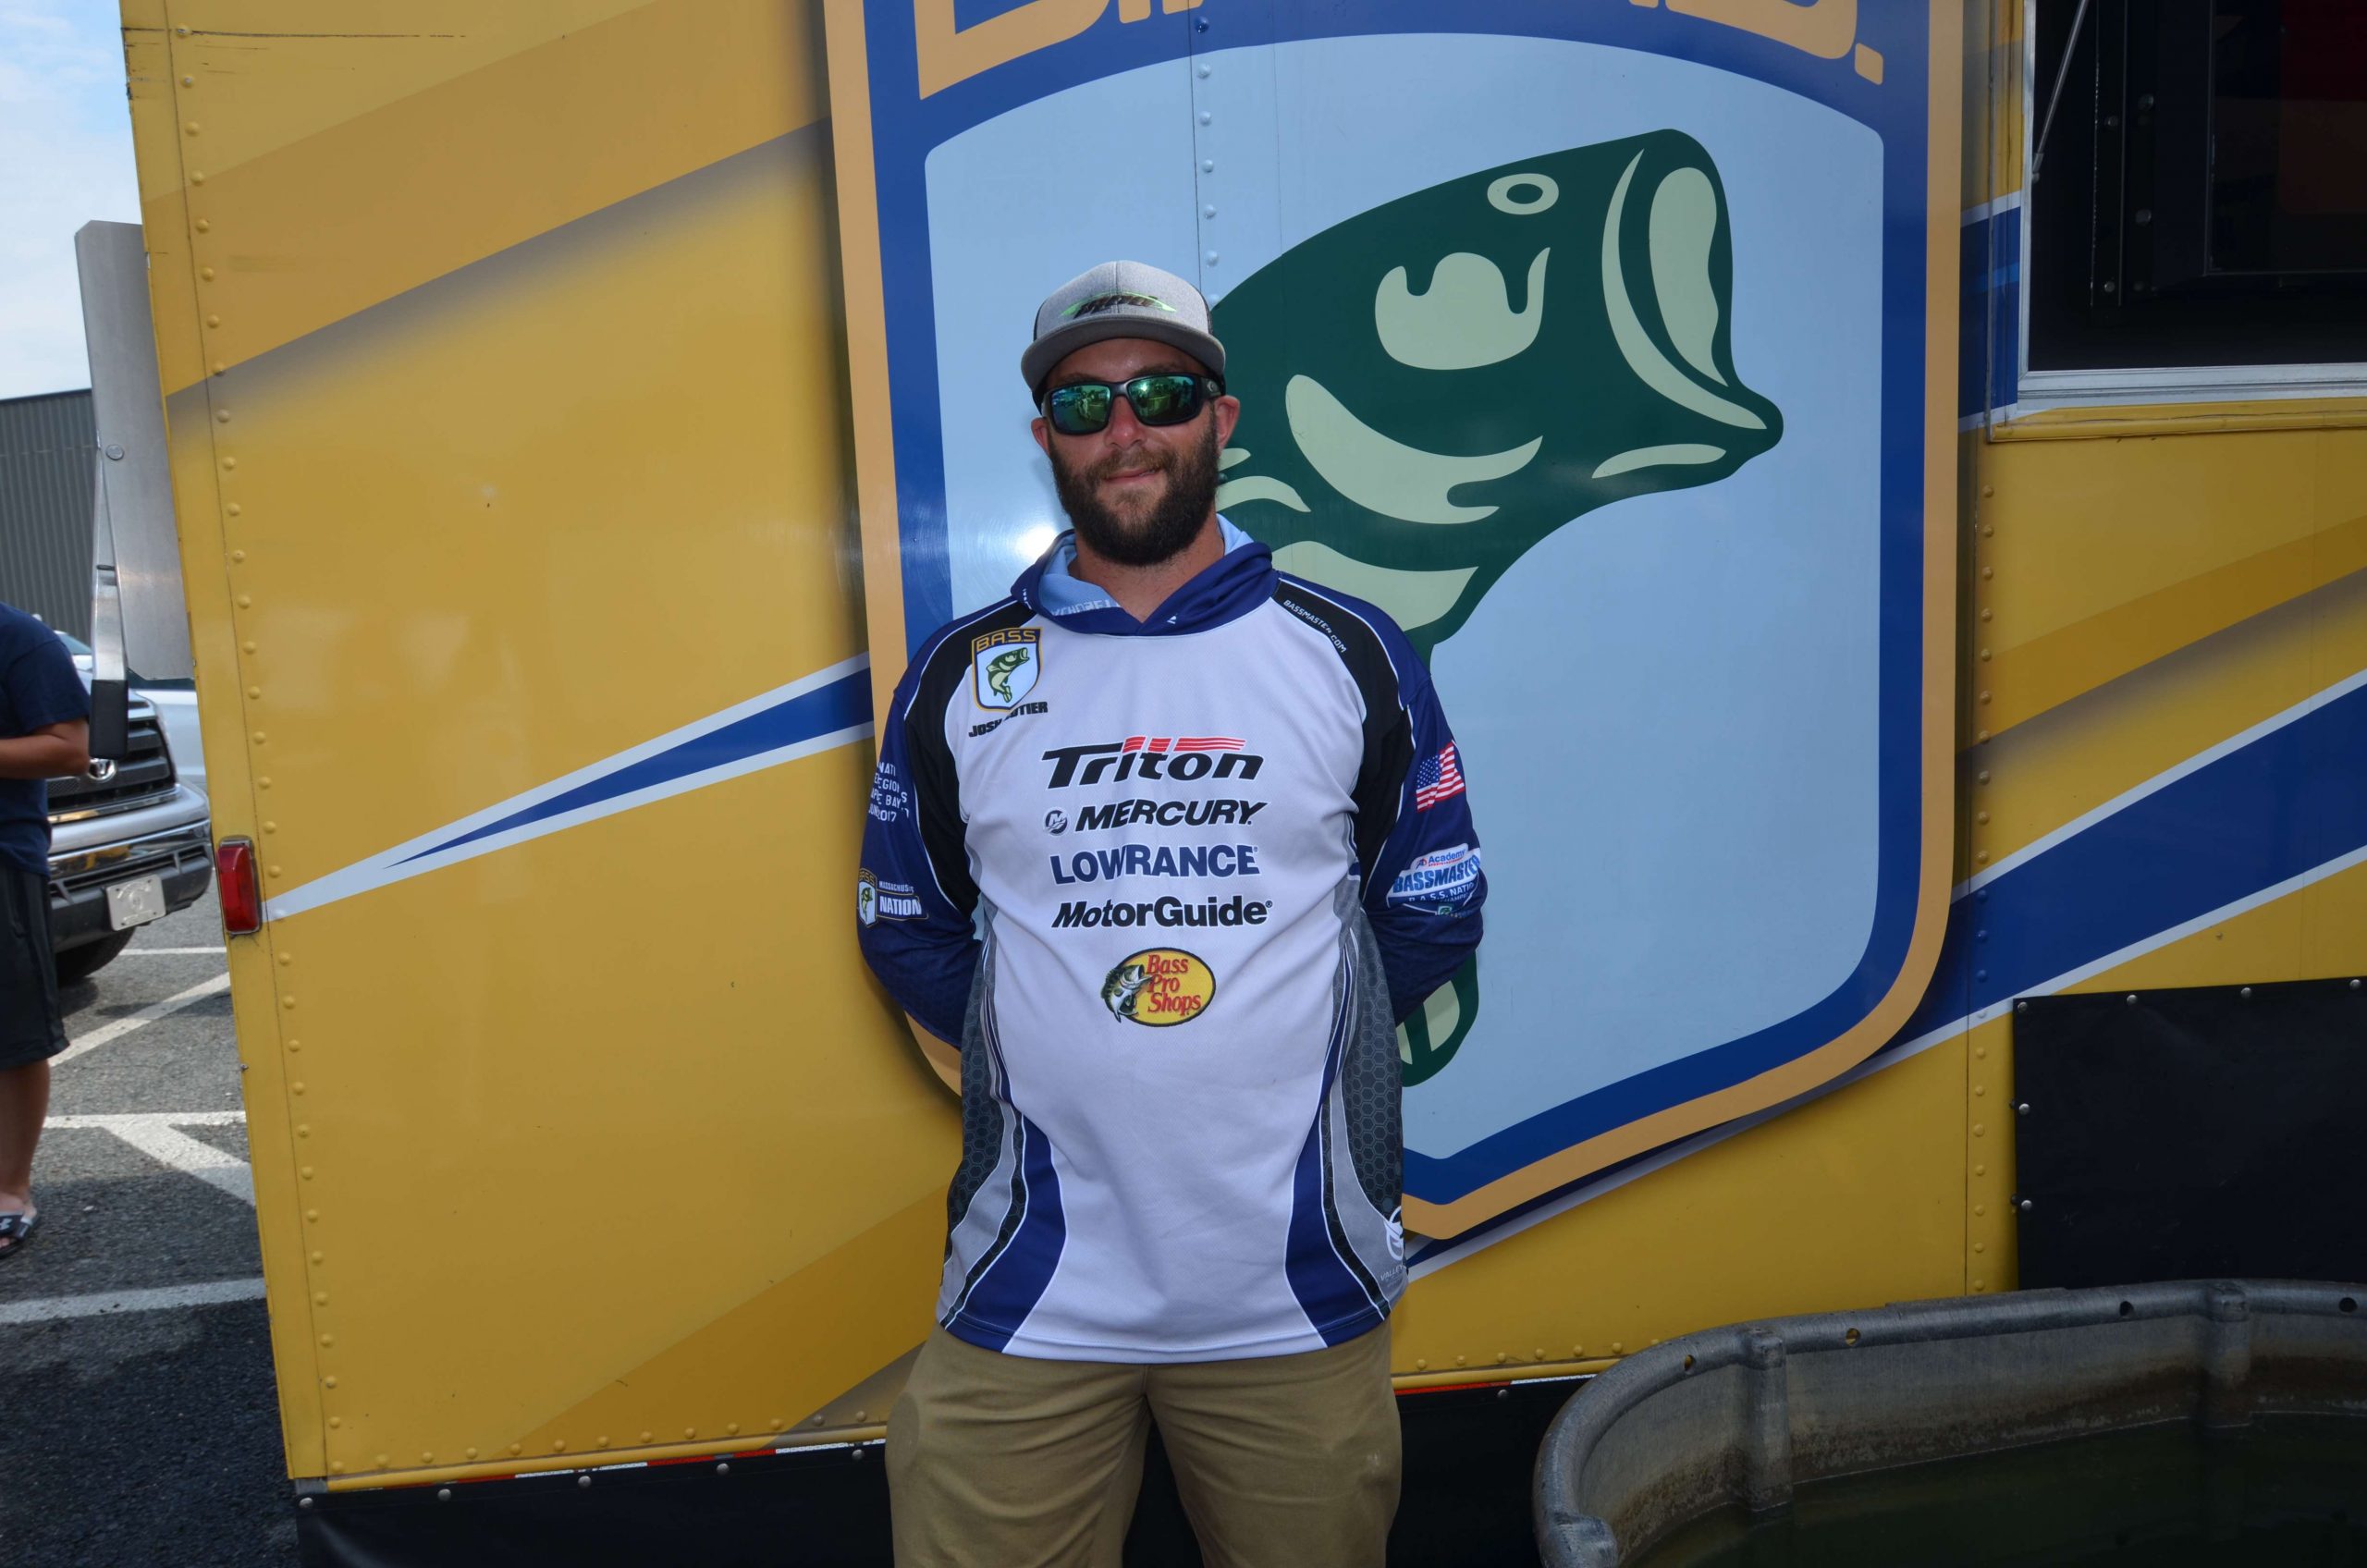 <h4>
Josh Cotier</h4>
Massachusetts Nonboater<br>
B.A.S.S. Nation Club: The Outcasts <BR>
Occupation:  Contractor<BR>
Hobbies: Shooting and Freedom<BR>
Sponsors: Irod BMT Outdoors
